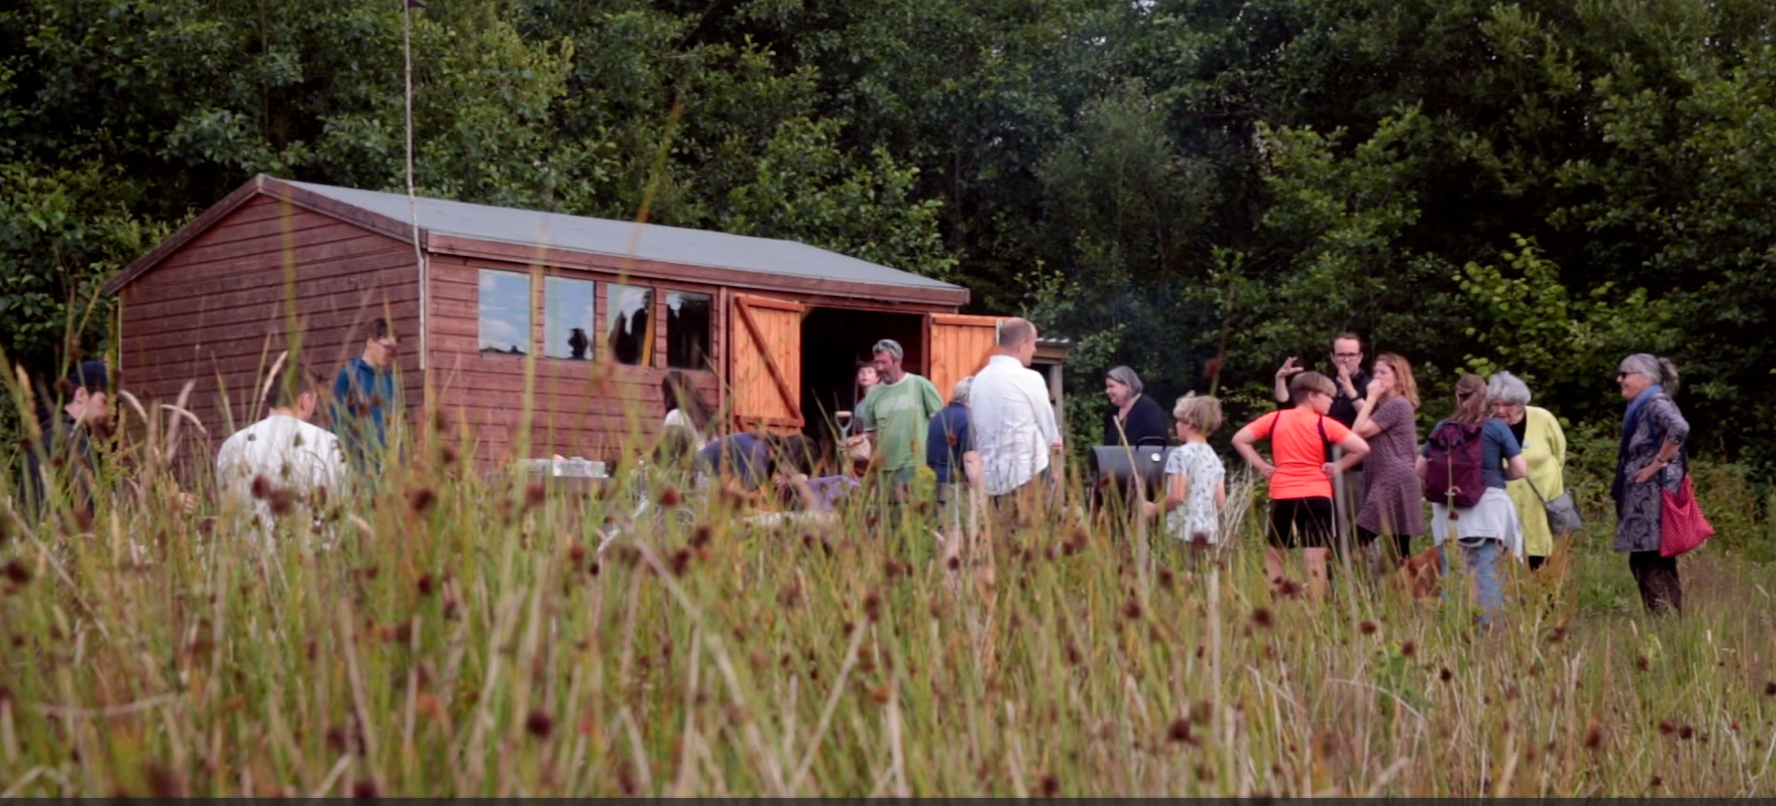 The forefront is full of strands of green grass and wild flowers. To the rear is a wooden shed with four windows and double doors, which are opened outwards. There are around fifteen people of all ages standing outside the shed with a barbecue open in the middle.  